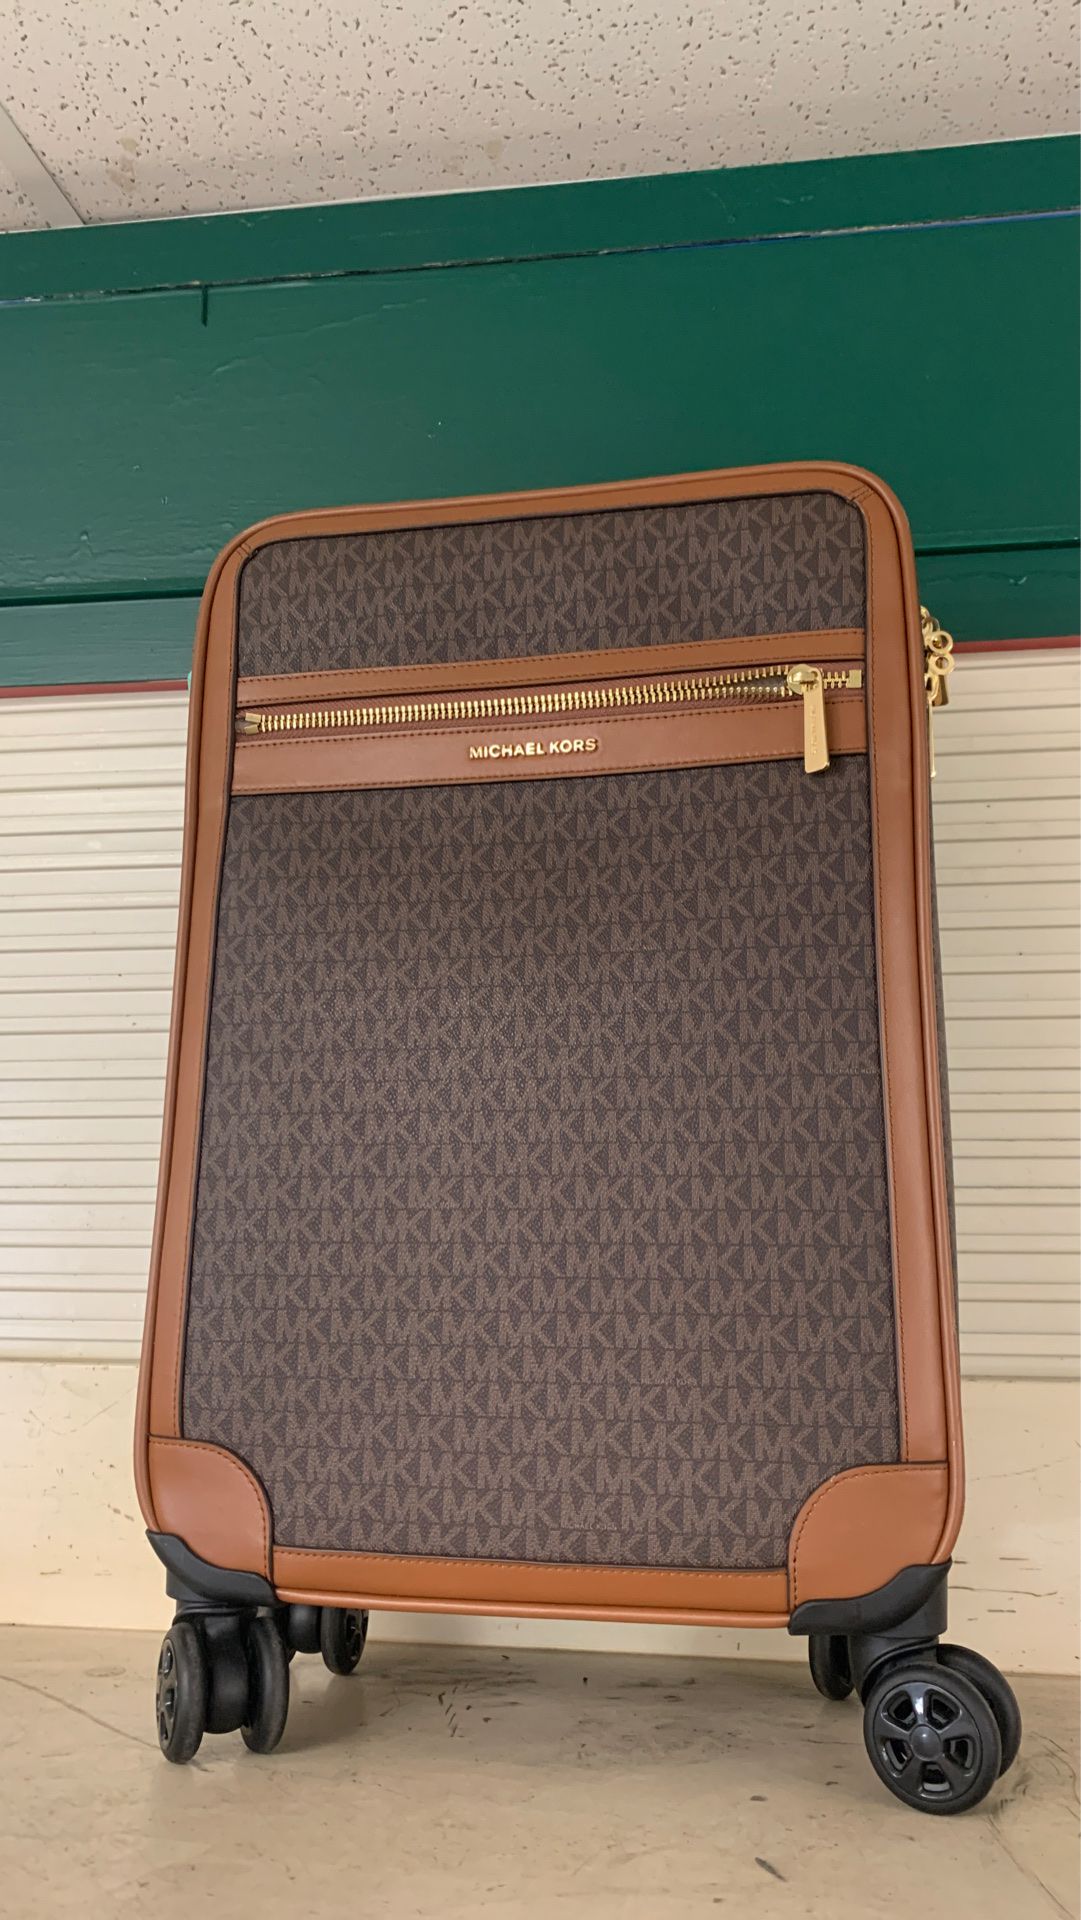 Michael Kors small suitcase